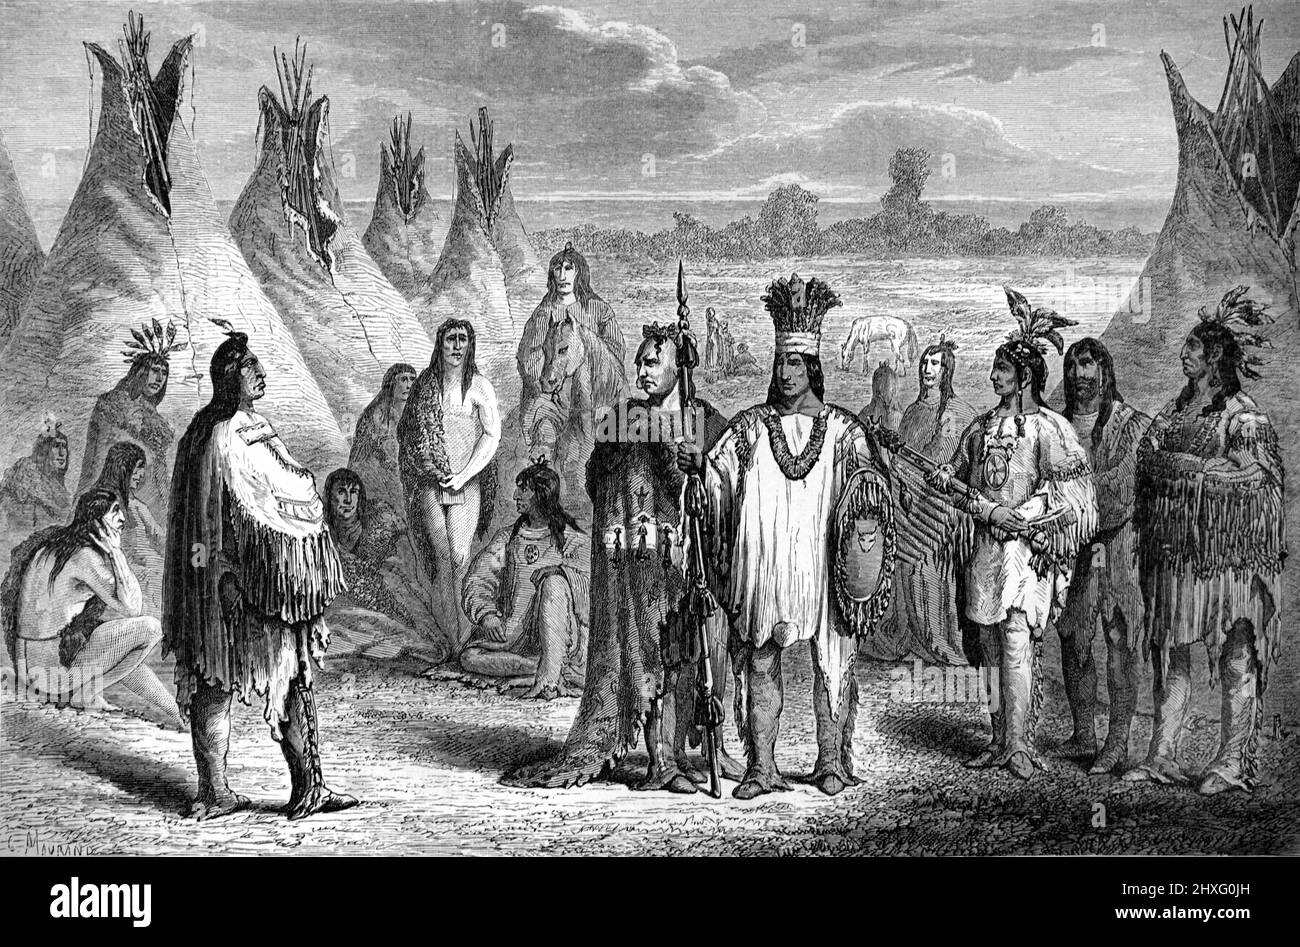 Tepees, Teepees or Tipi Camp or Village of Native American Cree Indians, or First Nation People, Canada. Vintage Illustration or Engraving 1860. Stock Photo